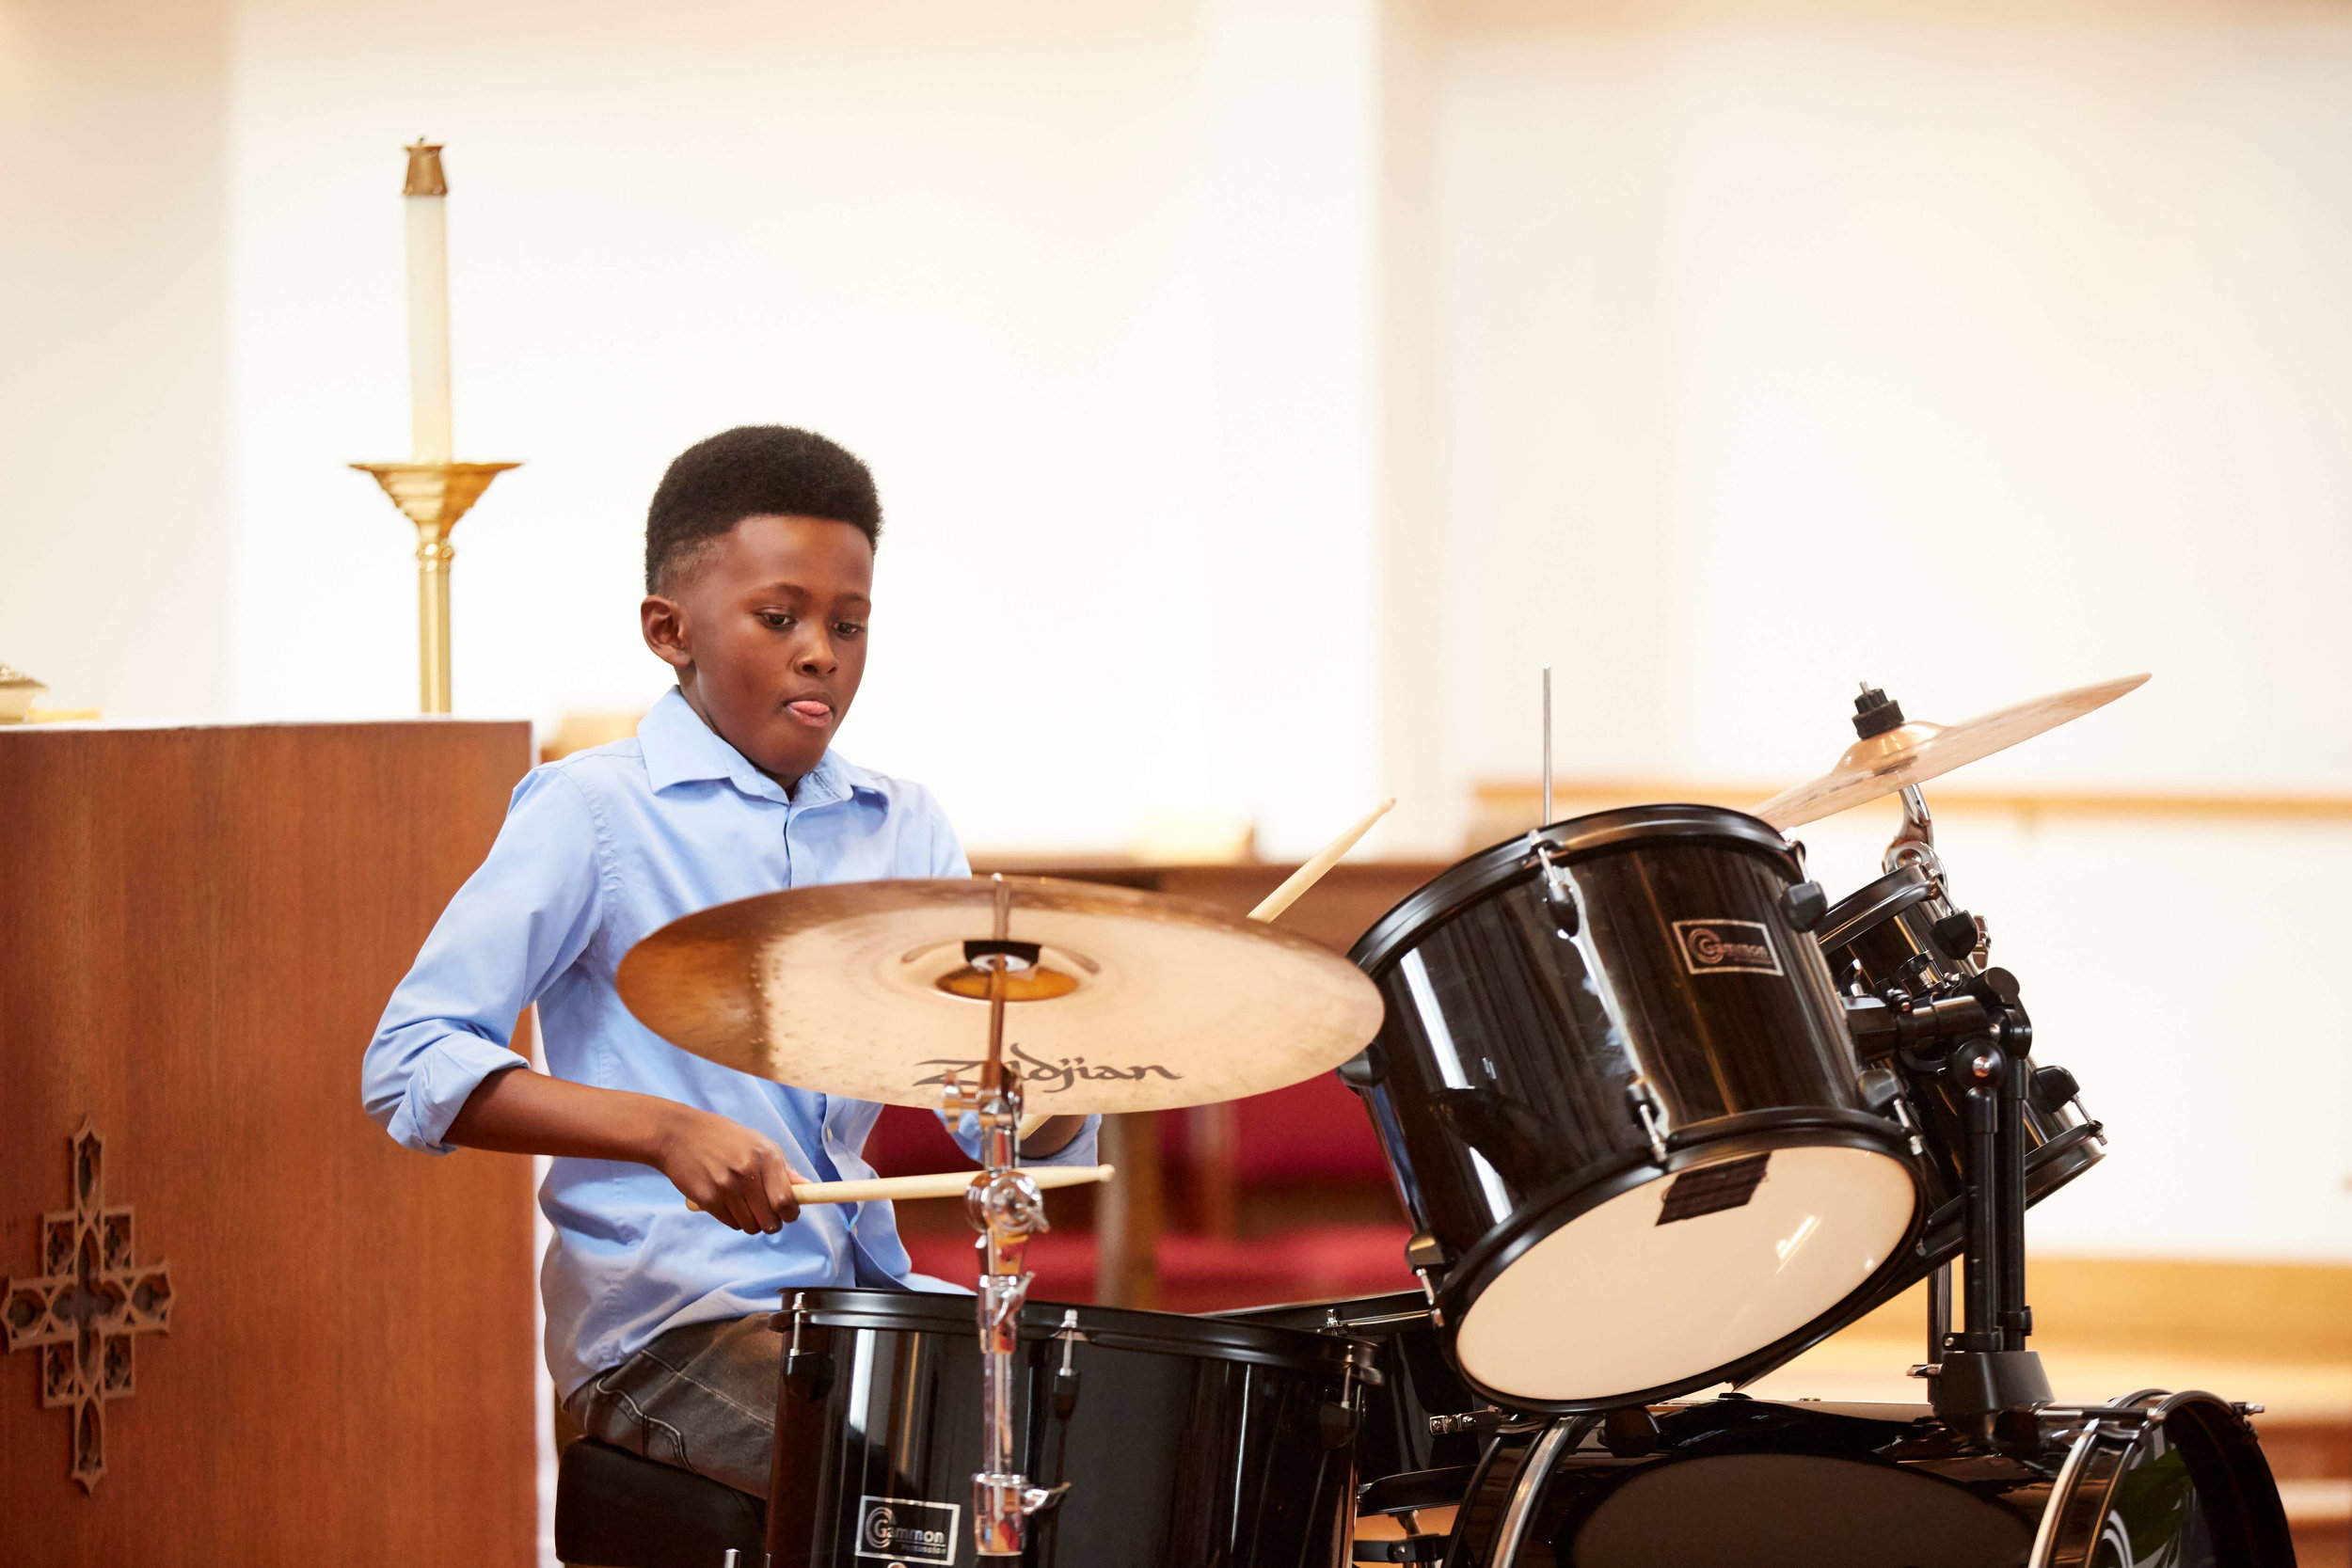   DRUM LESSONS IN CINCINNATI, ANDERSON, &amp; MASON   for beginner, intermediate, and advanced students of all ages  CALL  513-560-9175  TODAY TO SCHEDULE YOUR FIRST LESSON   Request Info  